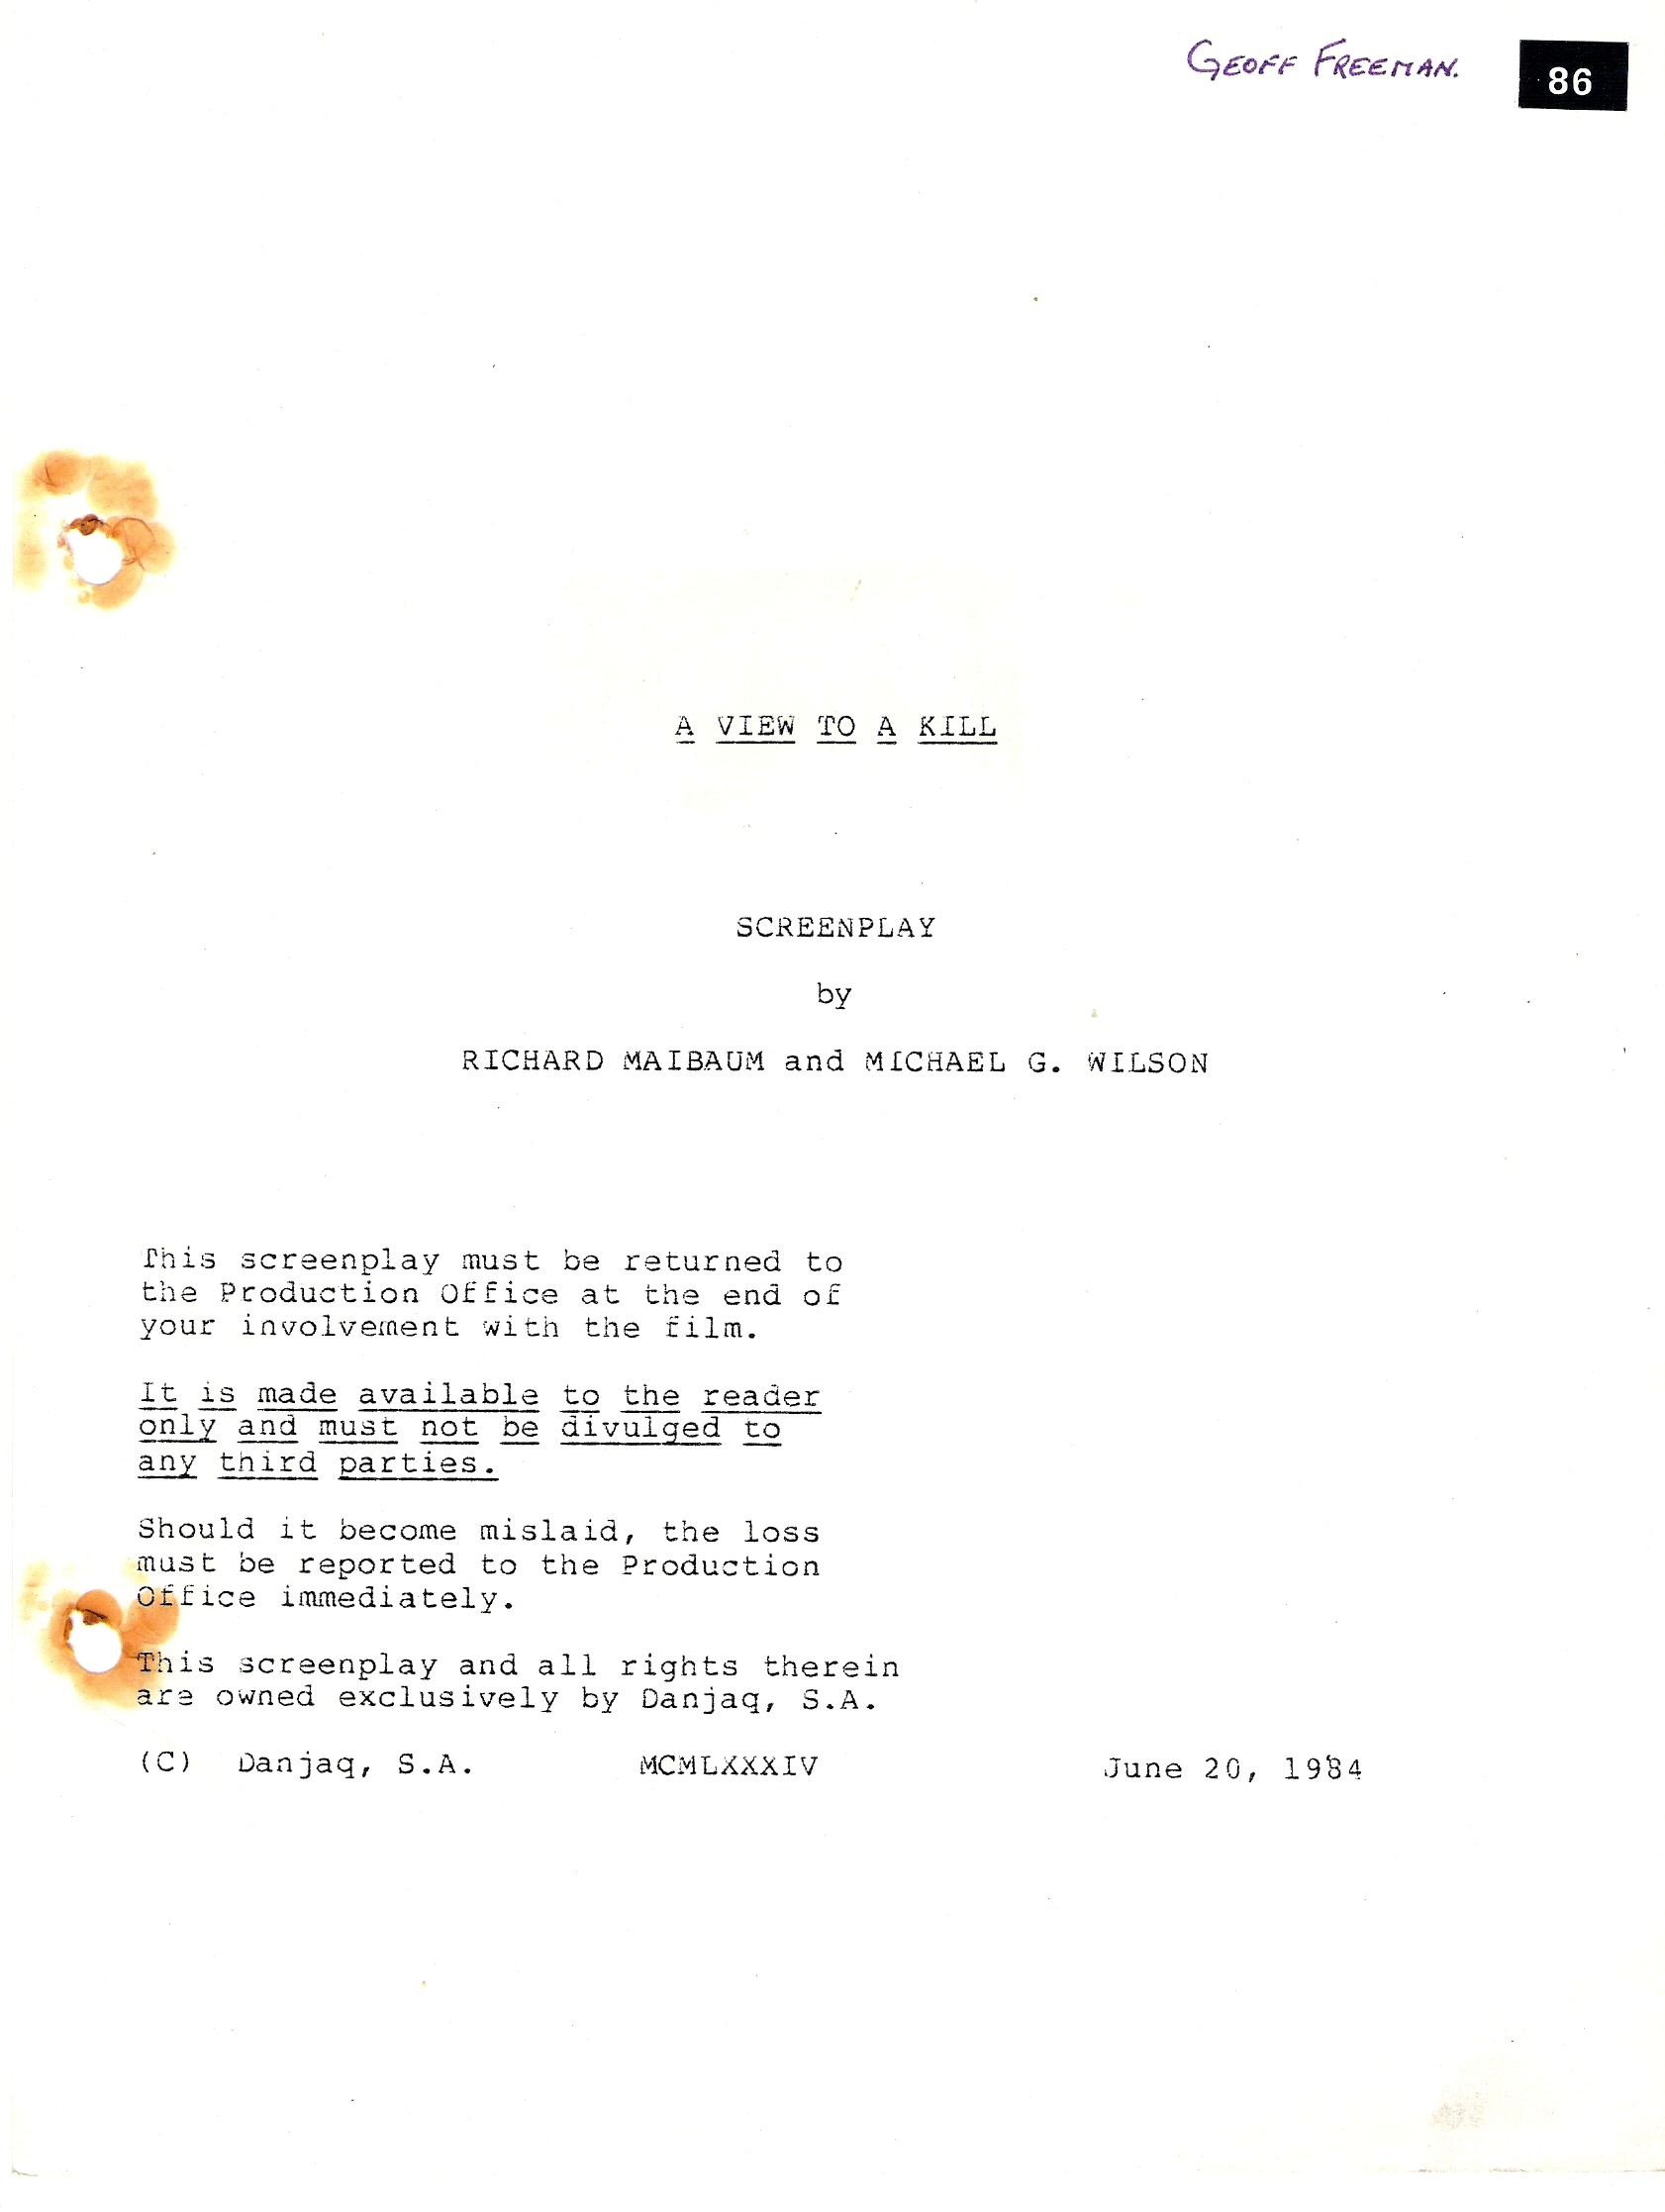 Original screenplay, 150 pages 